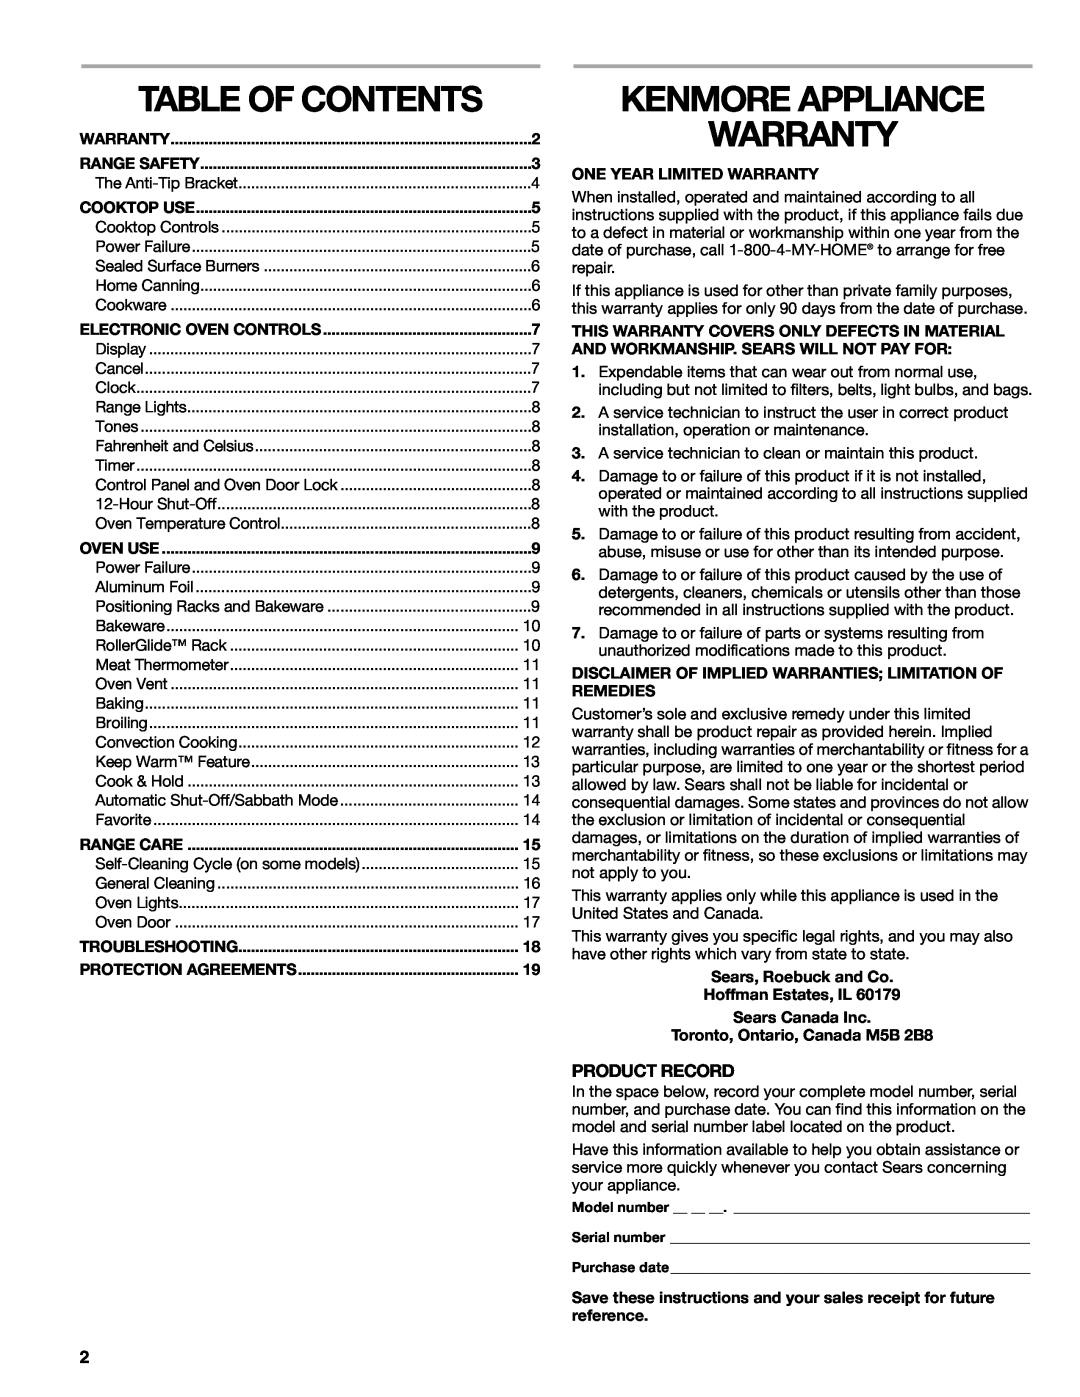 Kenmore W10166292A, 66578002700 manual Kenmore Appliance Warranty, Table Of Contents, Product Record 